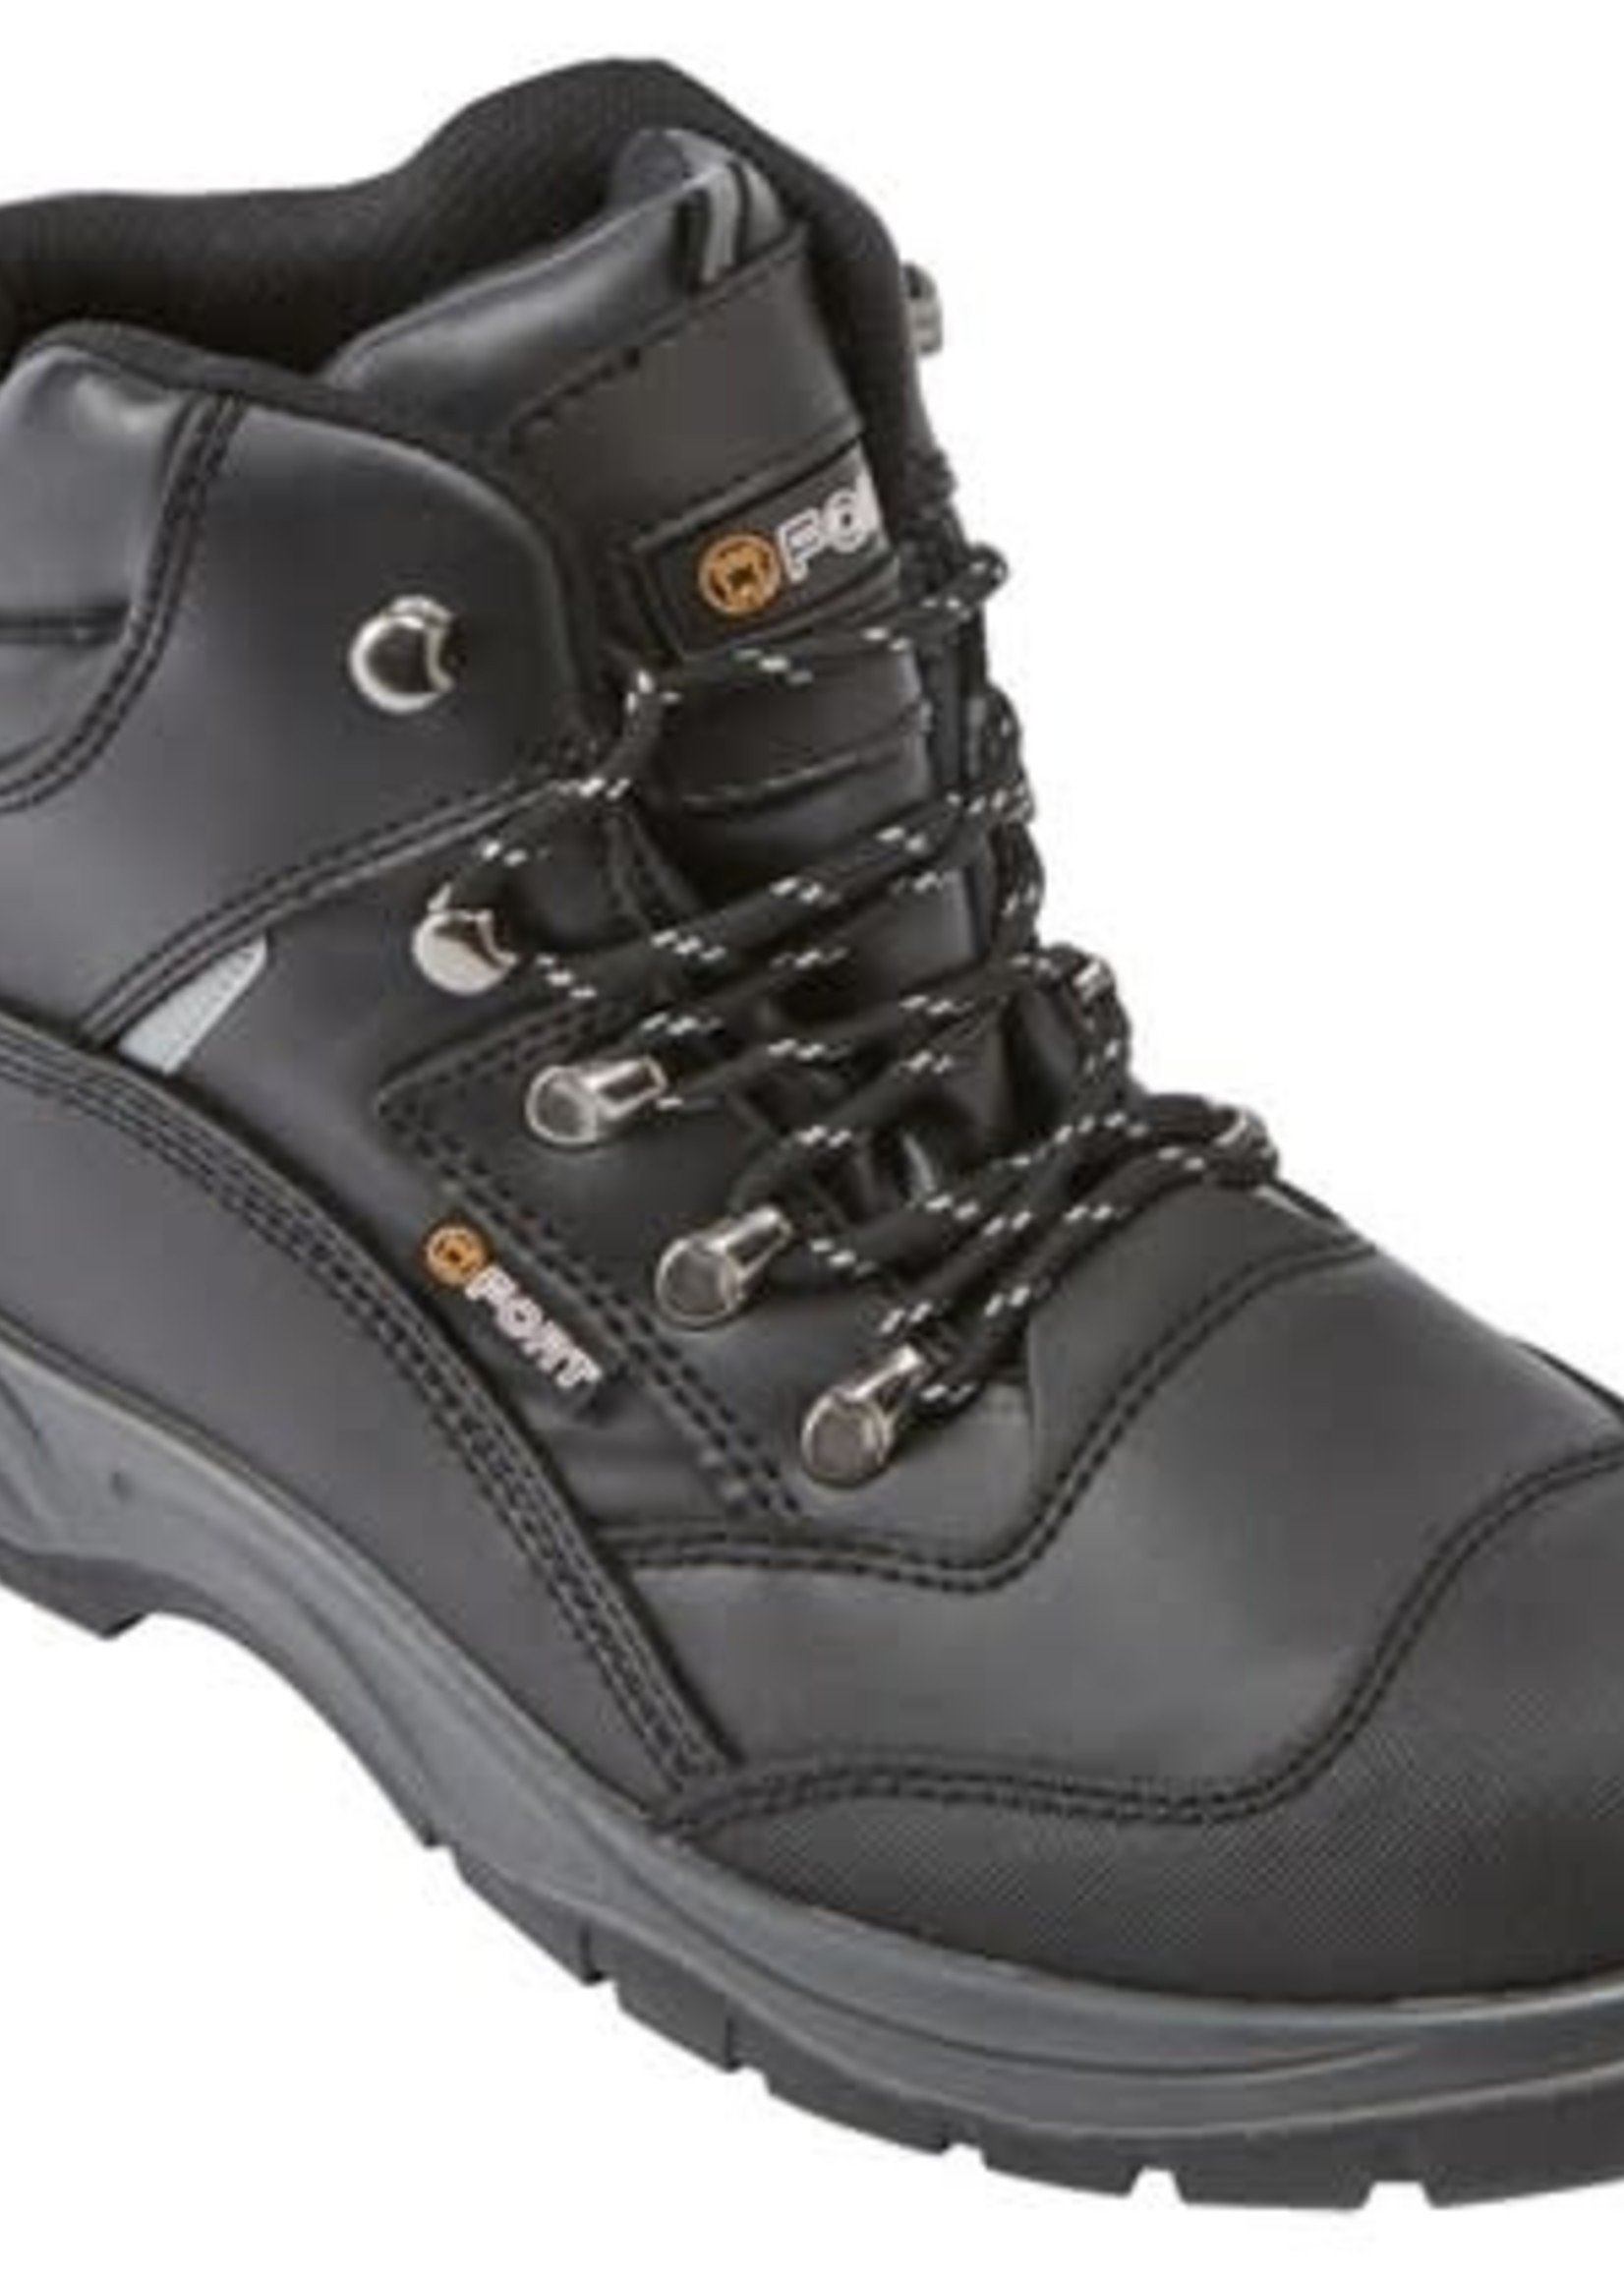 Amblers Knox Safety Boot